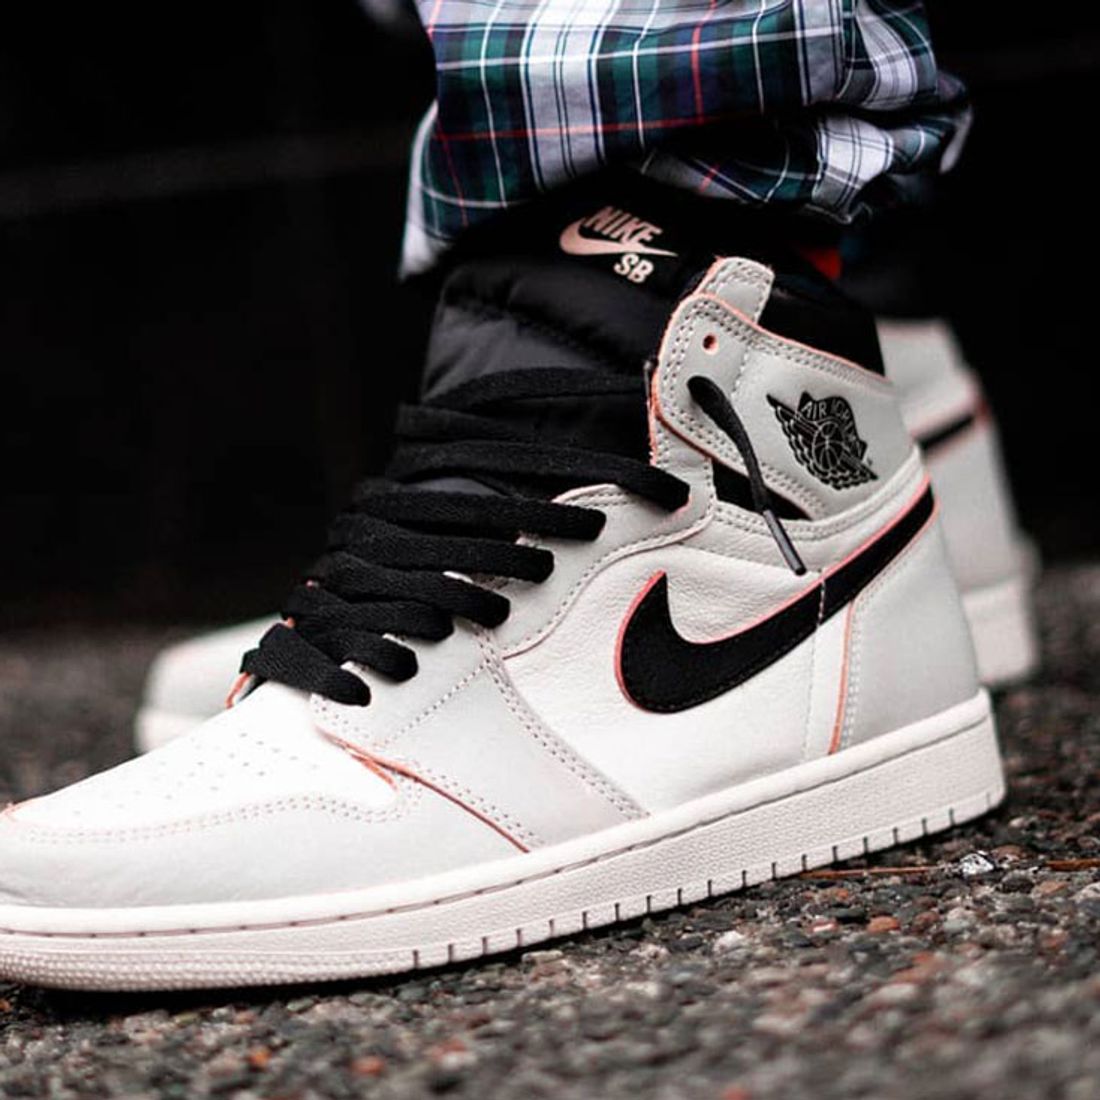 Here's How People Styling the SB x Air Jordan 1 'NYC to… - Sneaker Freaker